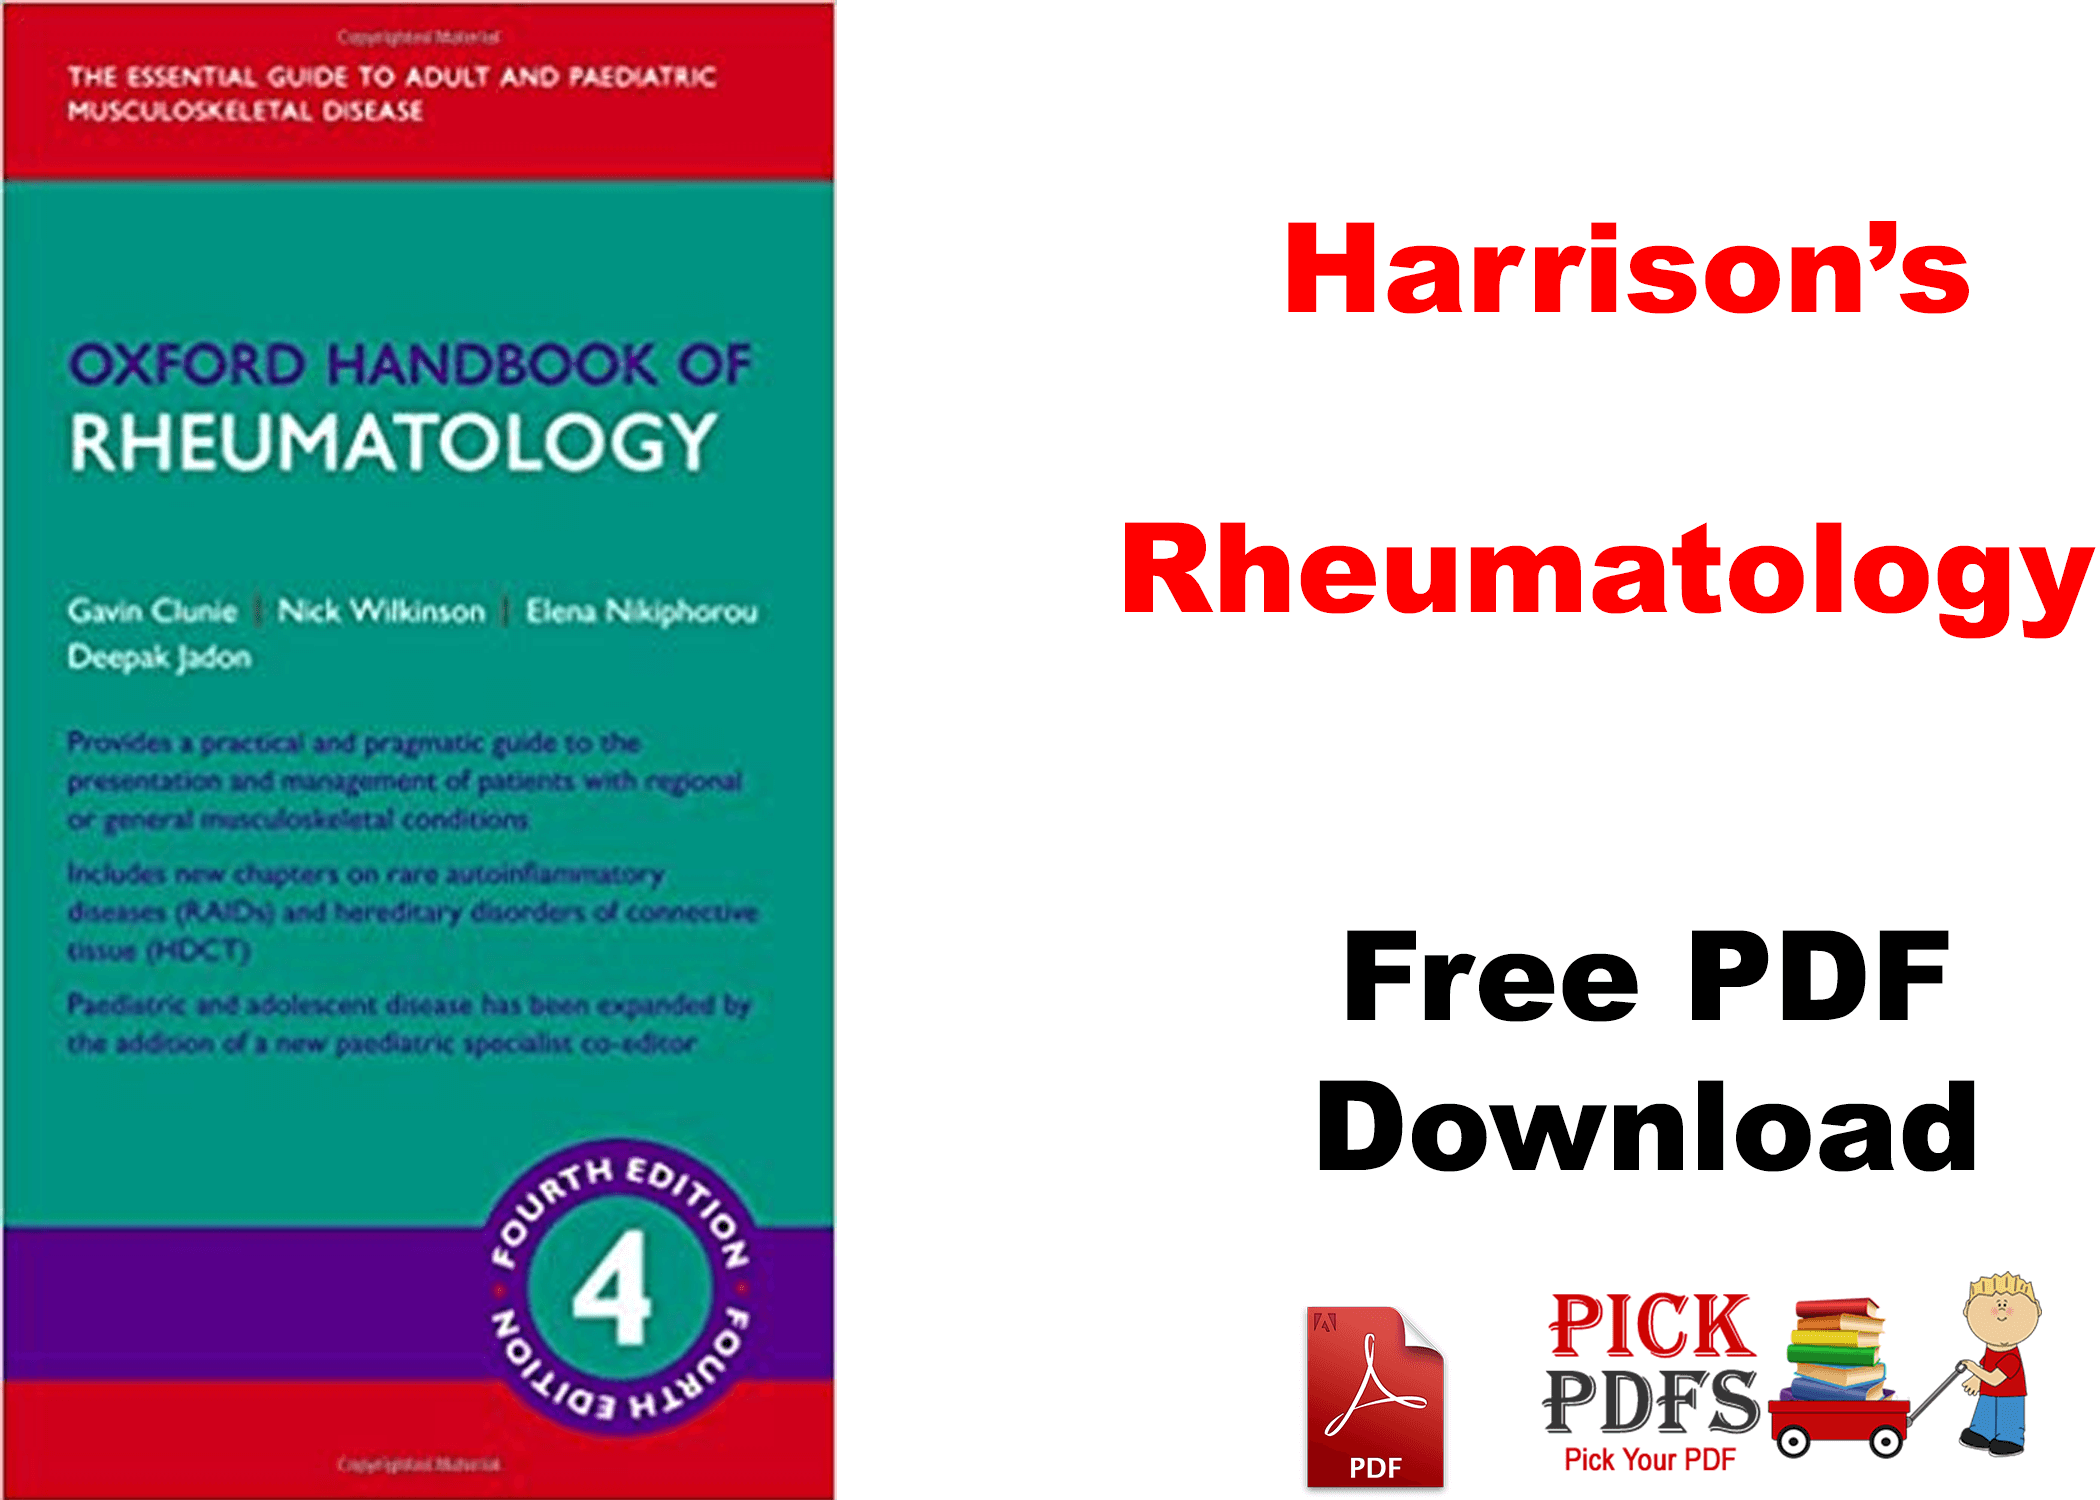 https://pickpdfs.com/office-based-rhinology-principles-and-techniques-pdf-free-pdf-pickpdfs-medical-books/